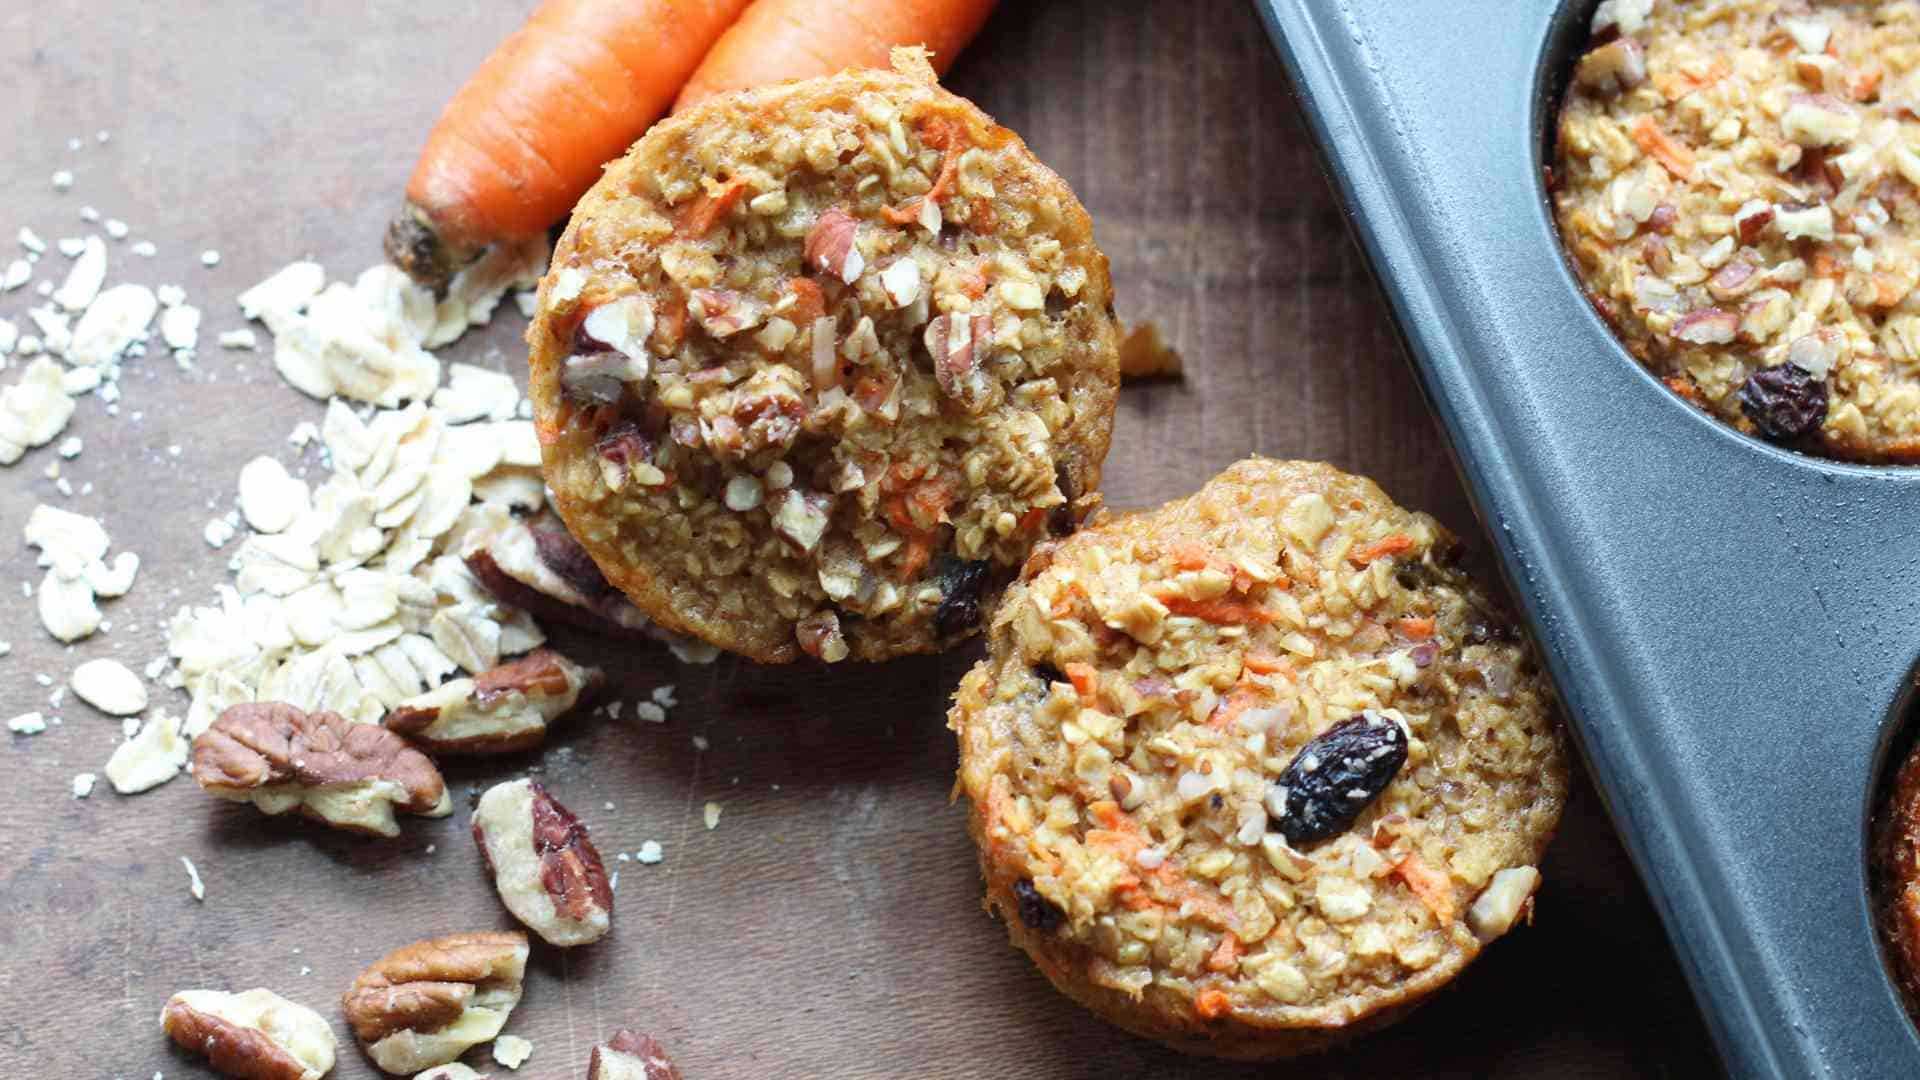 Healthy Carrot Cake Oatmeal Muffins - Carrot Cake Muffins